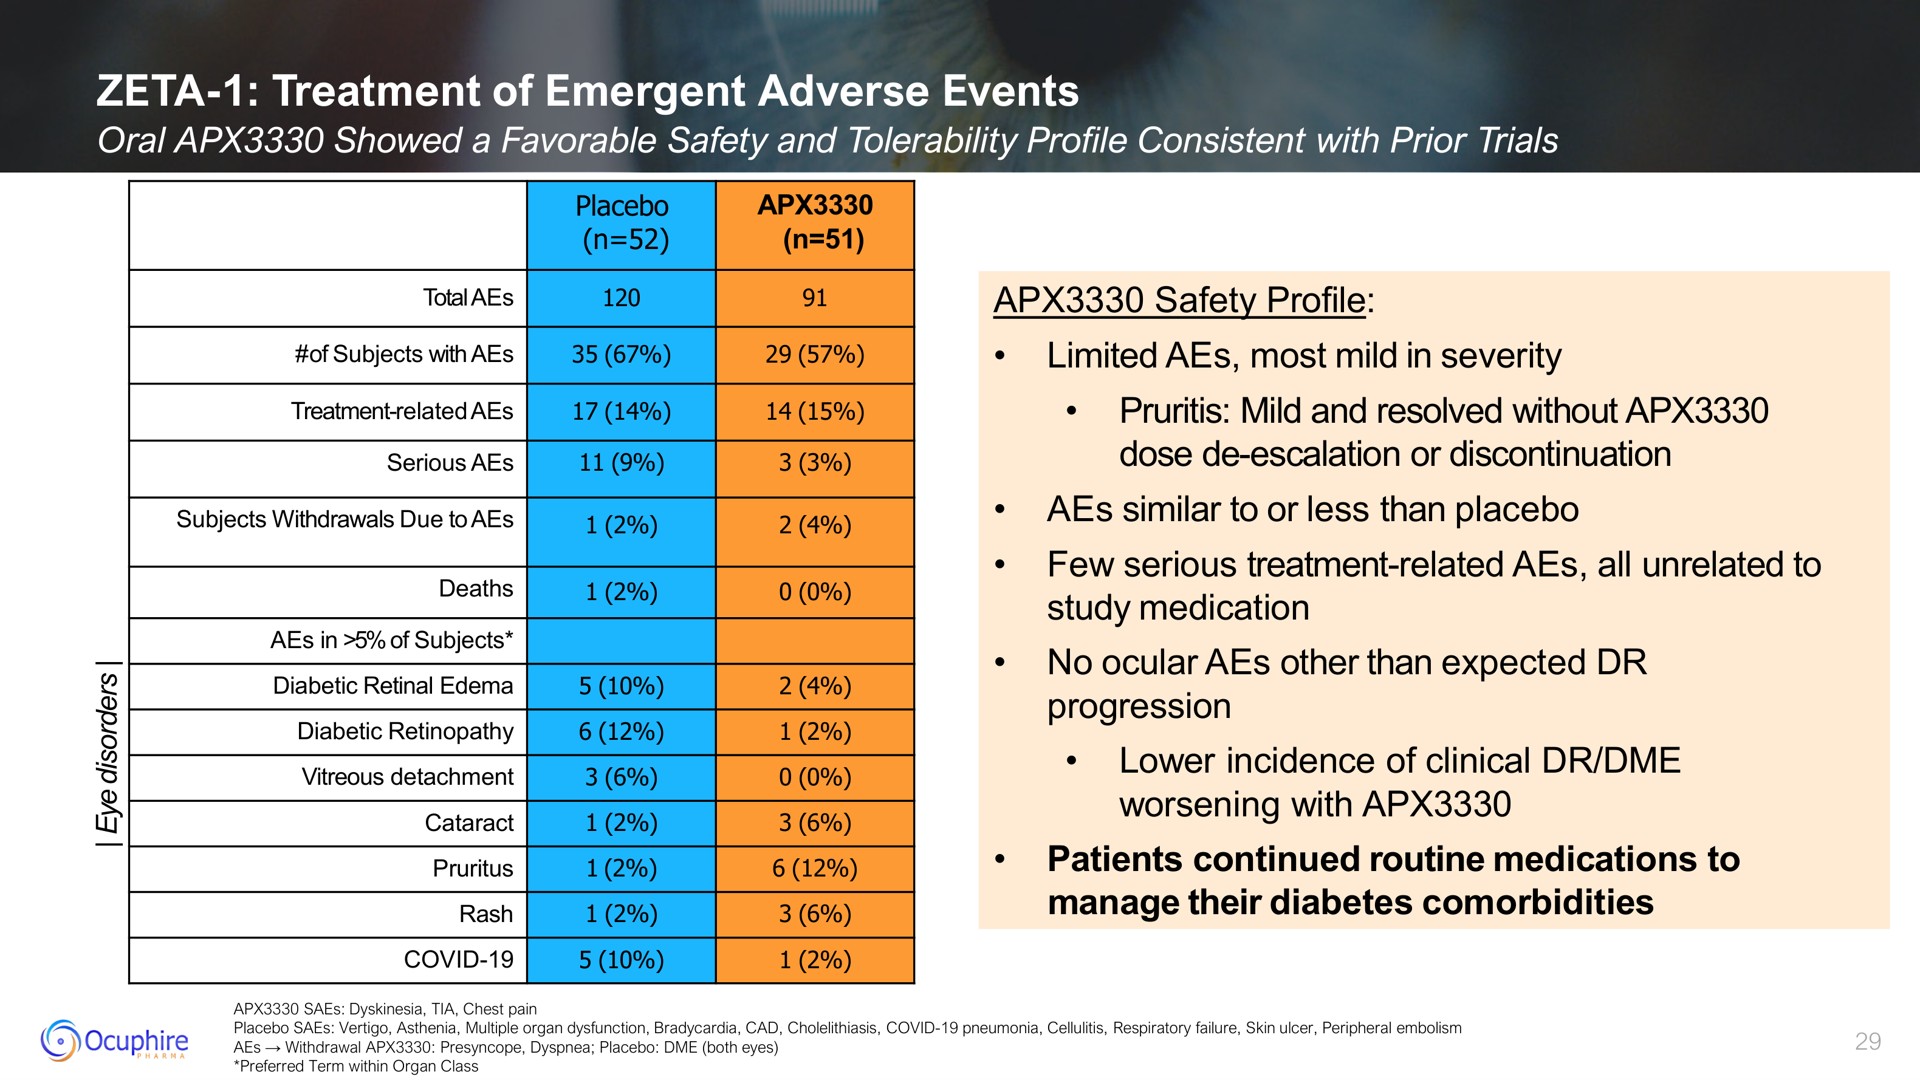 zeta treatment of emergent adverse events a mild and resolved without cat | Ocuphire Pharma